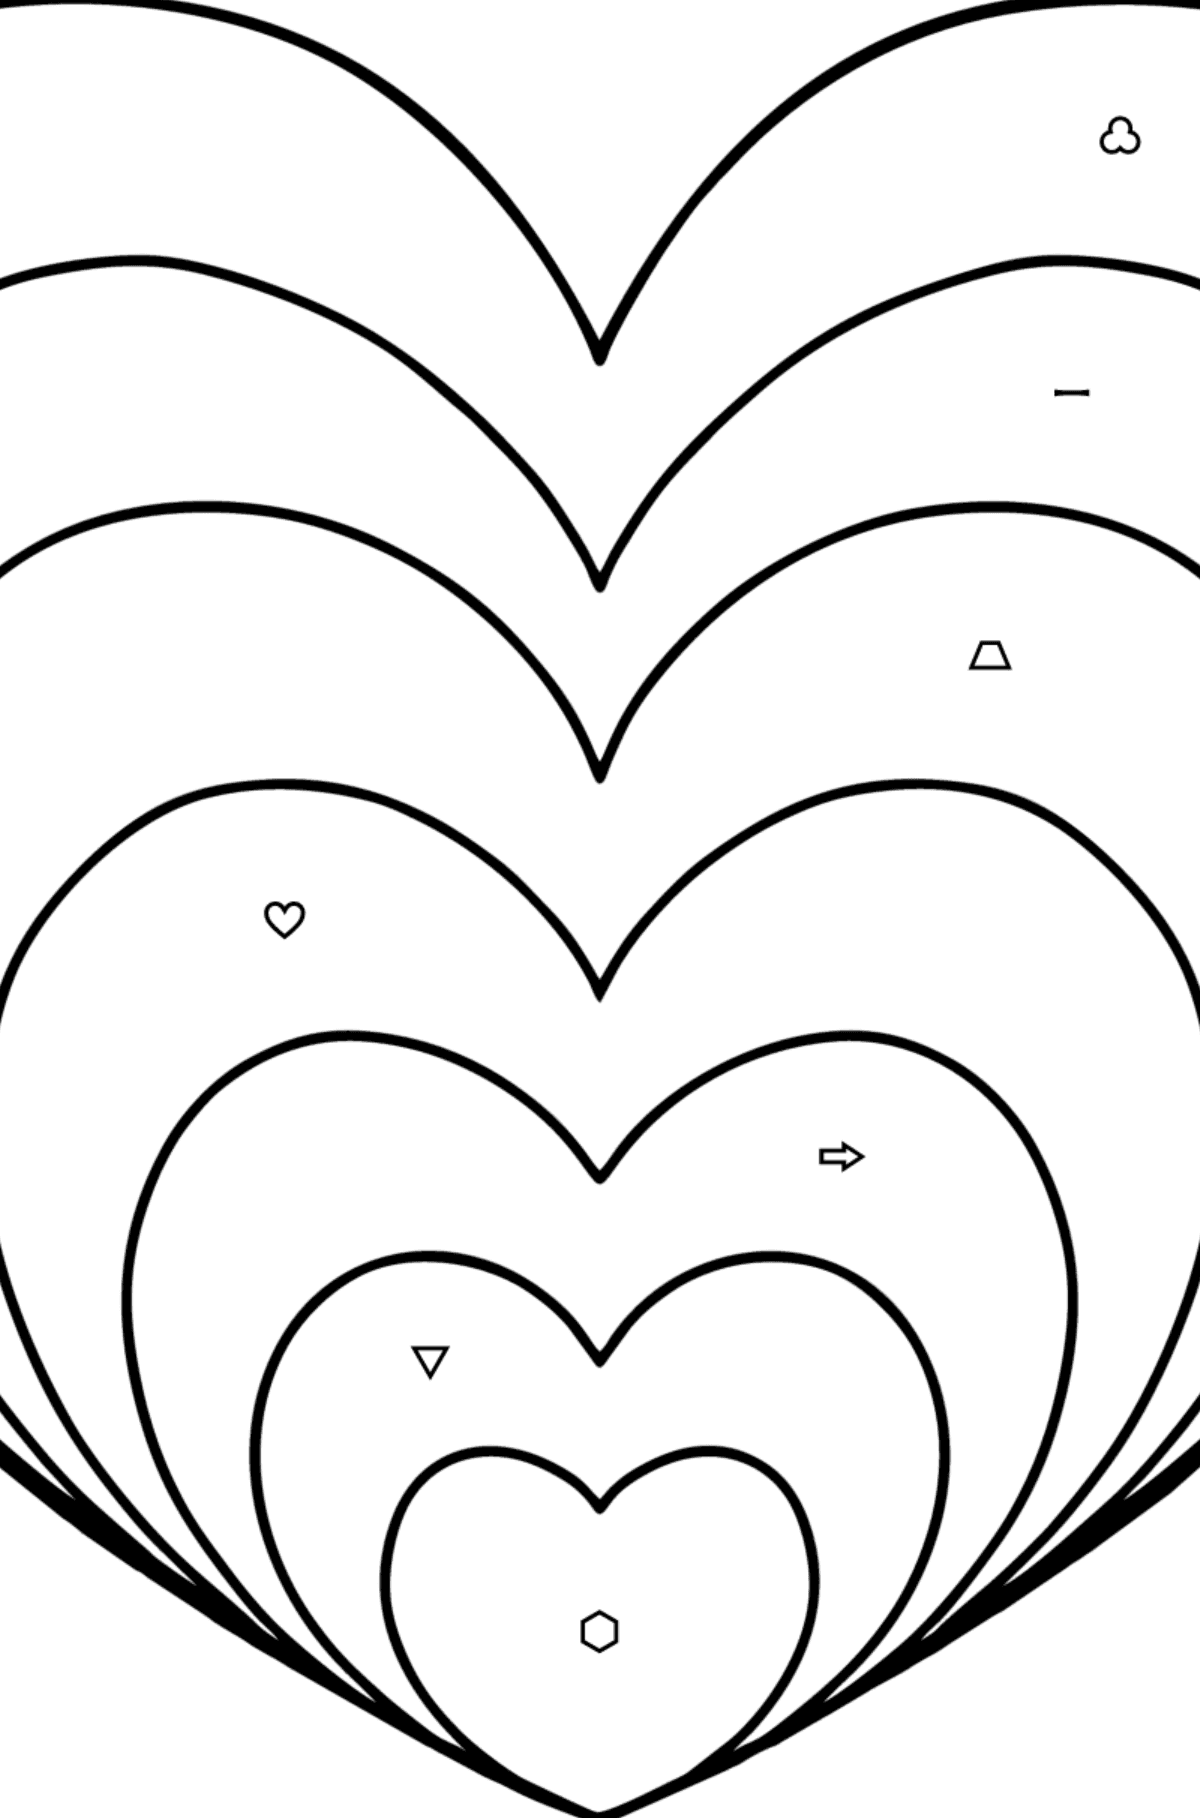 Simple Zen heart coloring page - Coloring by Symbols and Geometric Shapes for Kids